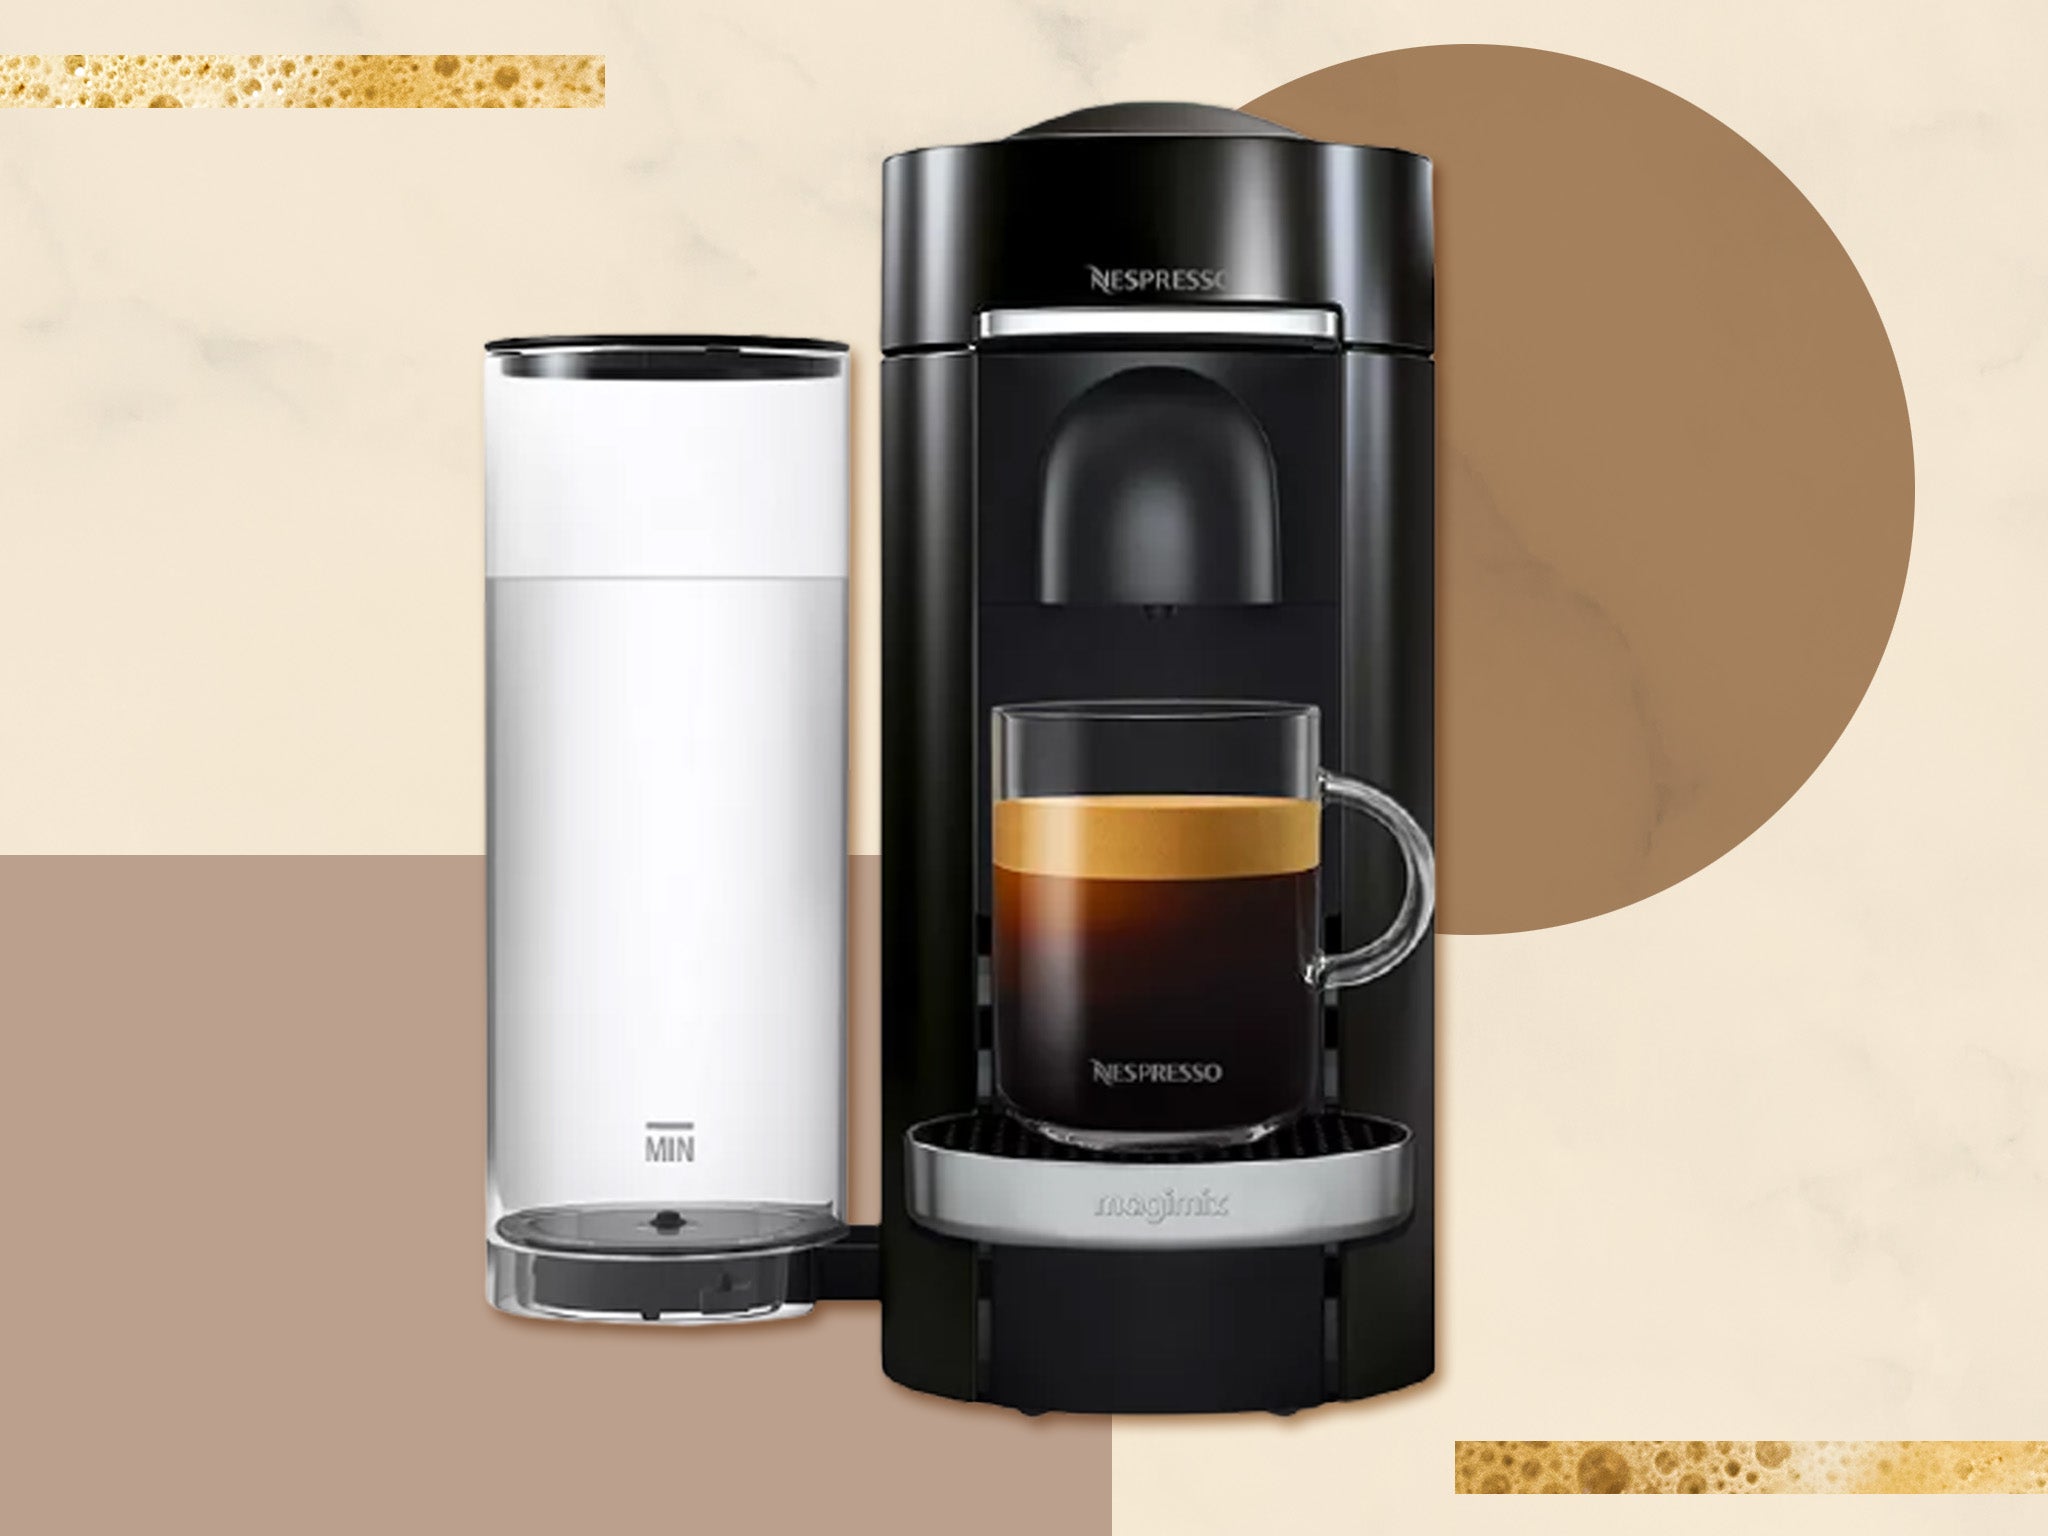 Wake up and smell the coffee with this impressive deal